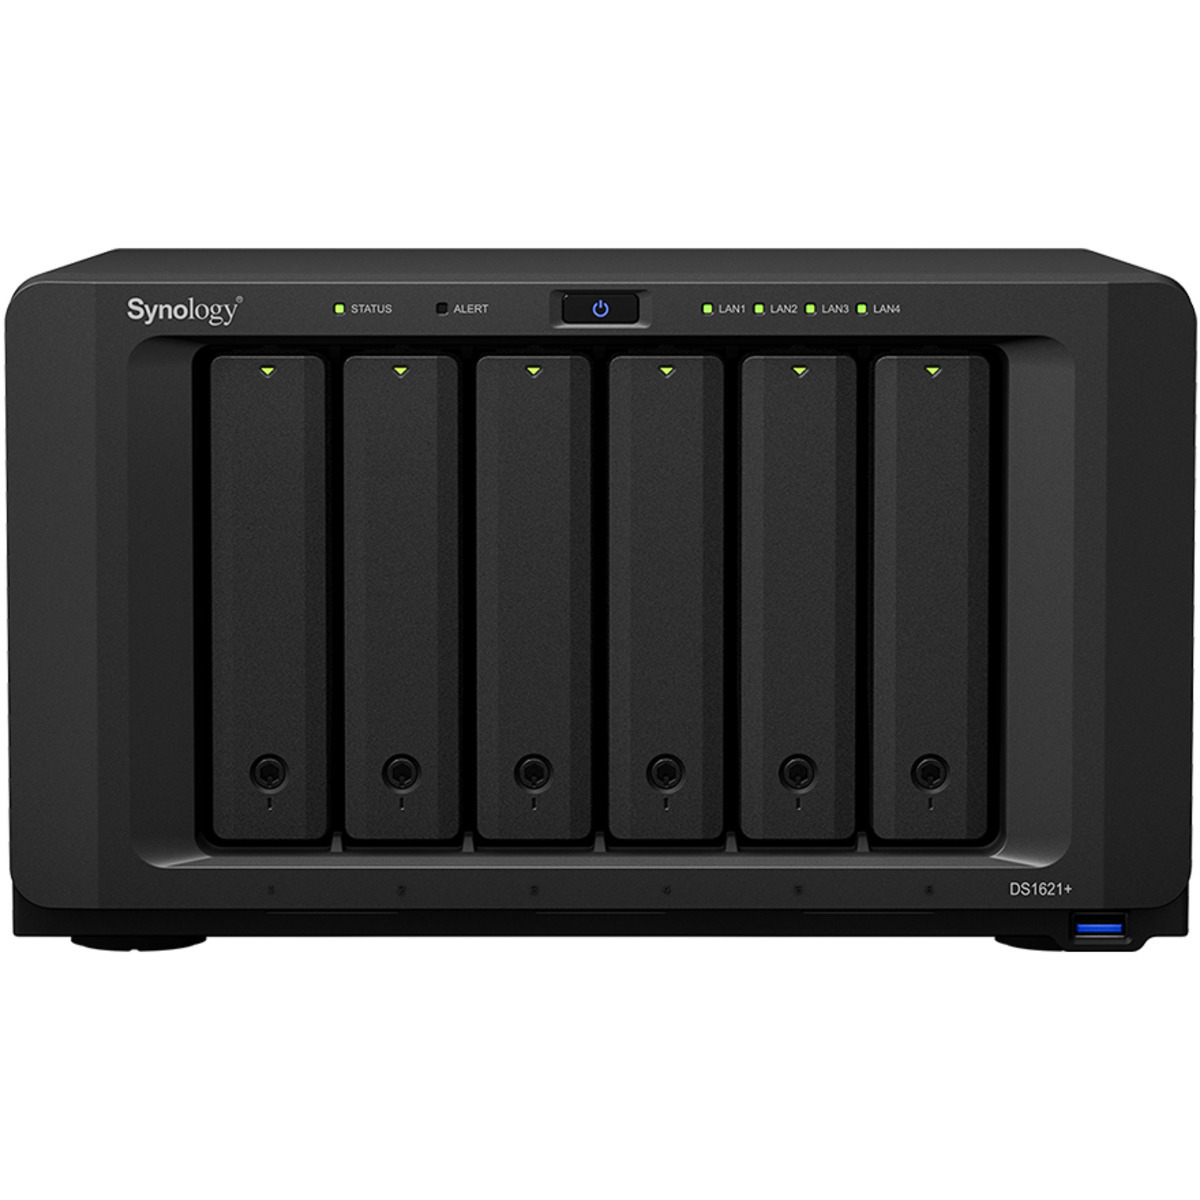 Synology DiskStation DS1621+ 66tb 6-Bay Desktop Multimedia / Power User / Business NAS - Network Attached Storage Device 3x22tb Seagate IronWolf Pro ST22000NT001 3.5 7200rpm SATA 6Gb/s HDD NAS Class Drives Installed - Burn-In Tested - FREE RAM UPGRADE DiskStation DS1621+